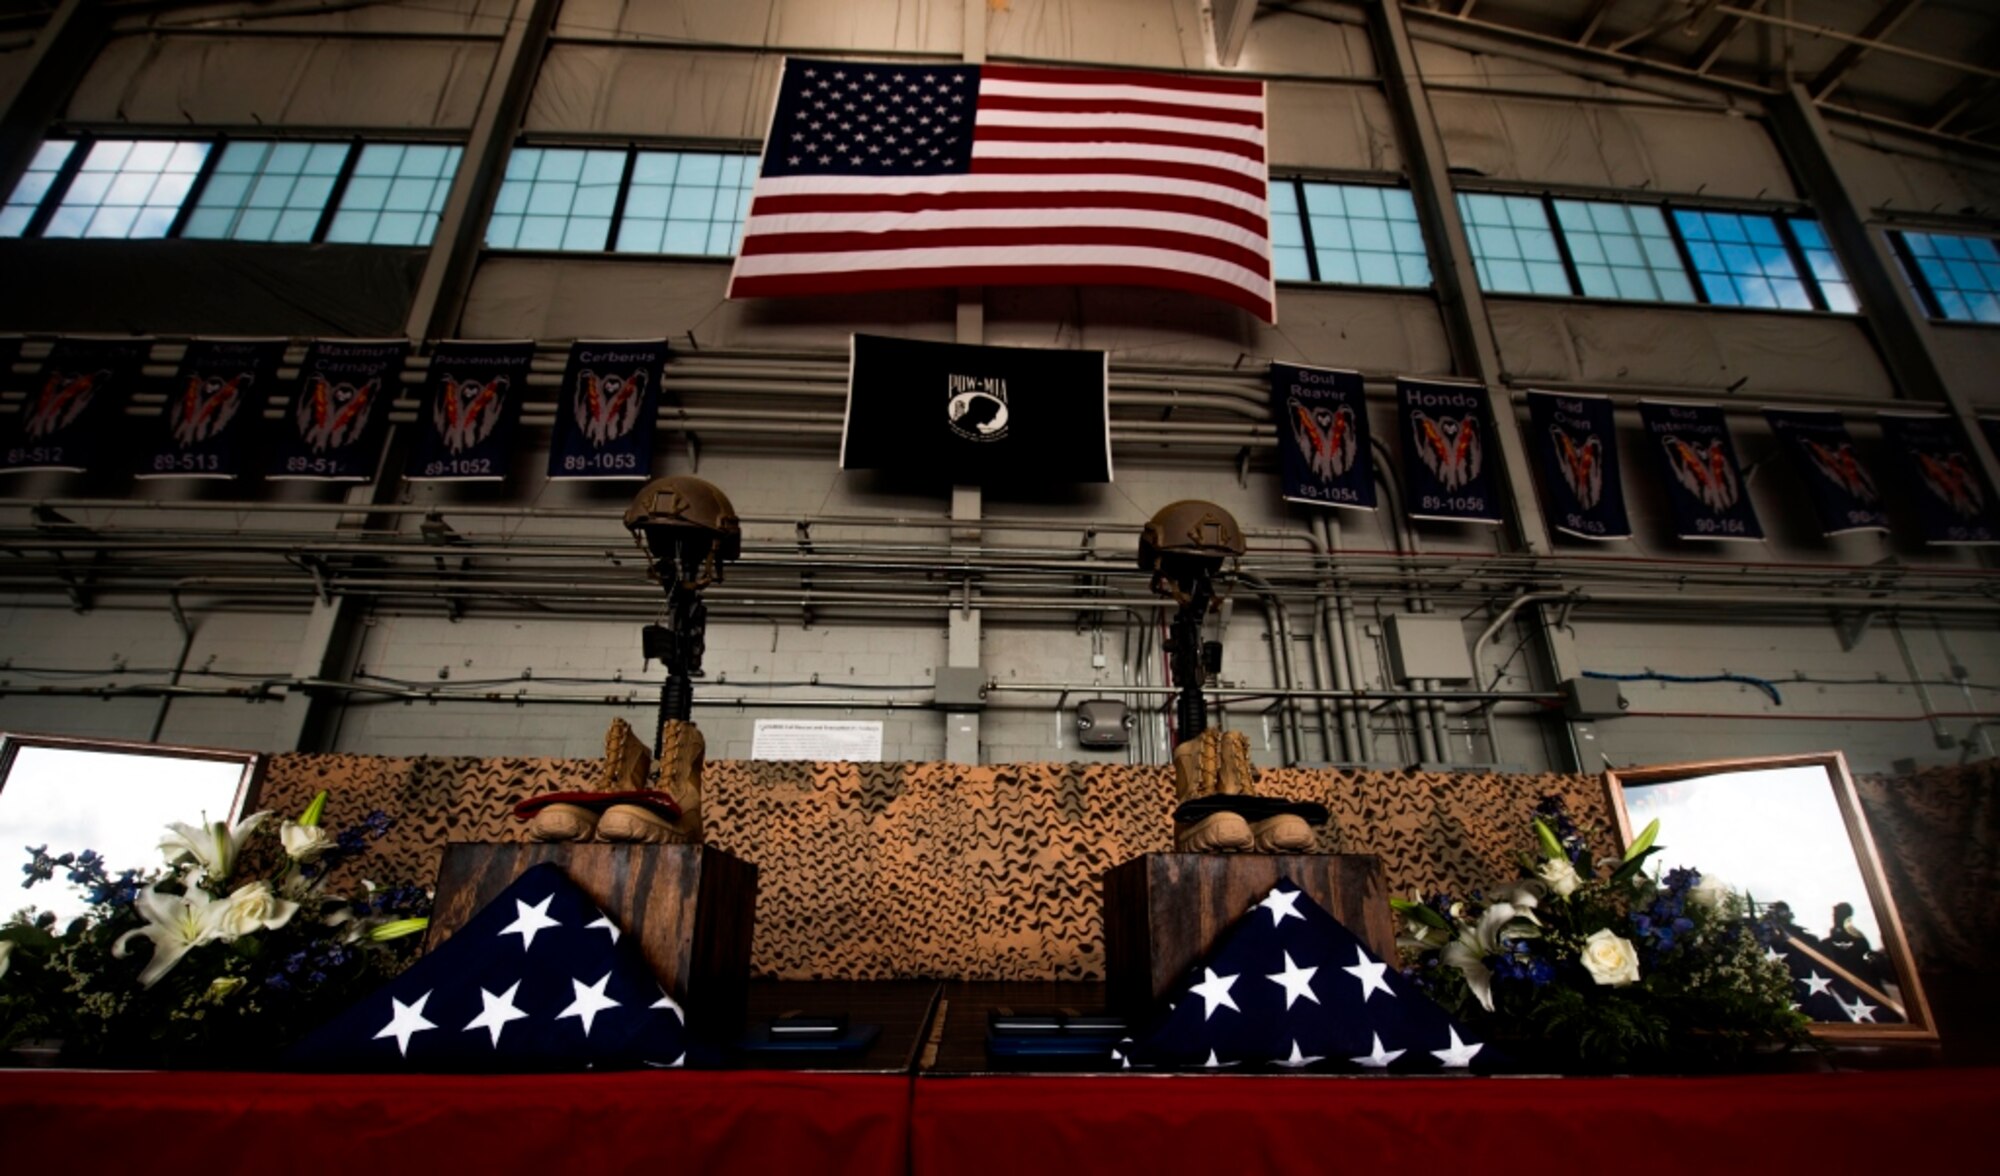 More than 500 Airmen, friends and family members gathered to mourn the loss of Tech. Sgt. Timothy Officer Jr., a tactical air control party Airman, and Tech. Sgt. Marty Bettelyoun, a combat controller, at Hurlburt Field, Fla., Aug. 7, 2015. Both Airmen died from injuries sustained in a freefall training accident on Eglin Range, Fla., Aug. 3, 2015. Both Special Tactics Airmen, assigned to the 24th Special Operations Wing, will be buried with full military honors. (U.S. Air Force photo by Senior Airman Christopher Callaway/Released)
